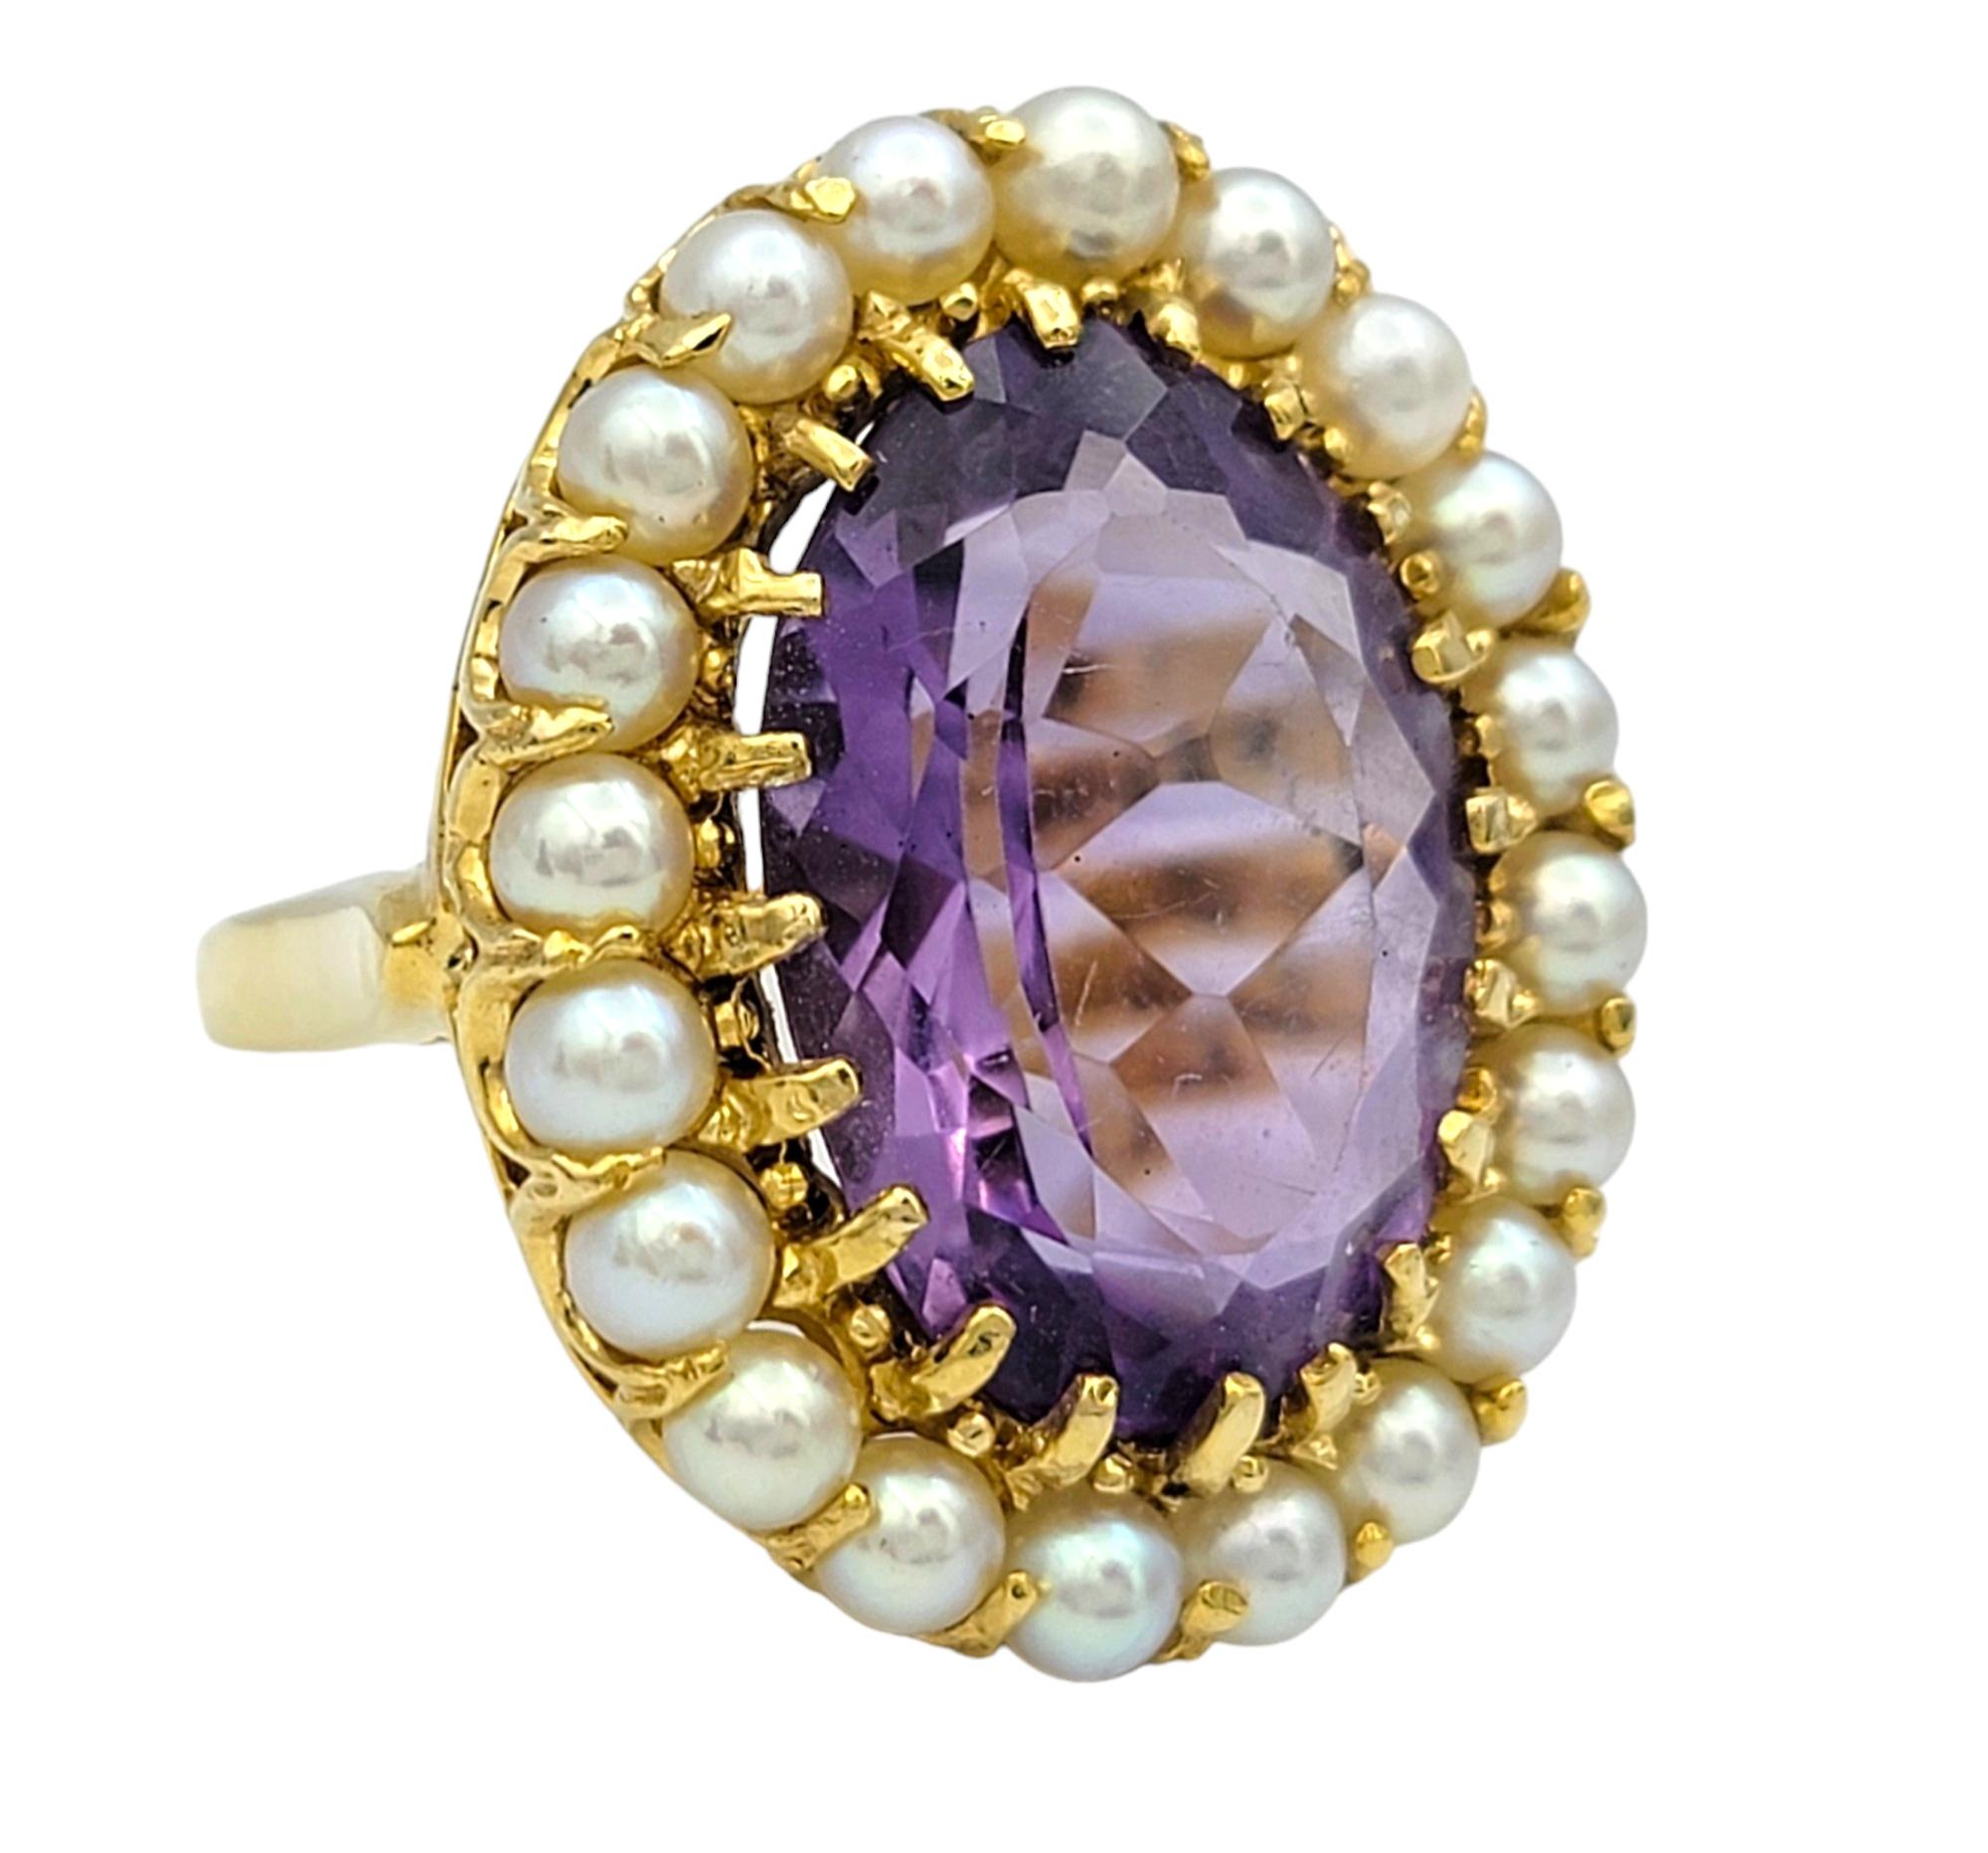 Ring Size: 8.5

This magnificent ring boasts a large oval purple amethyst at its center, radiating elegance and sophistication with its rich hue. Surrounding the amethyst is a delicate halo of lustrous seed pearls, creating a charming contrast